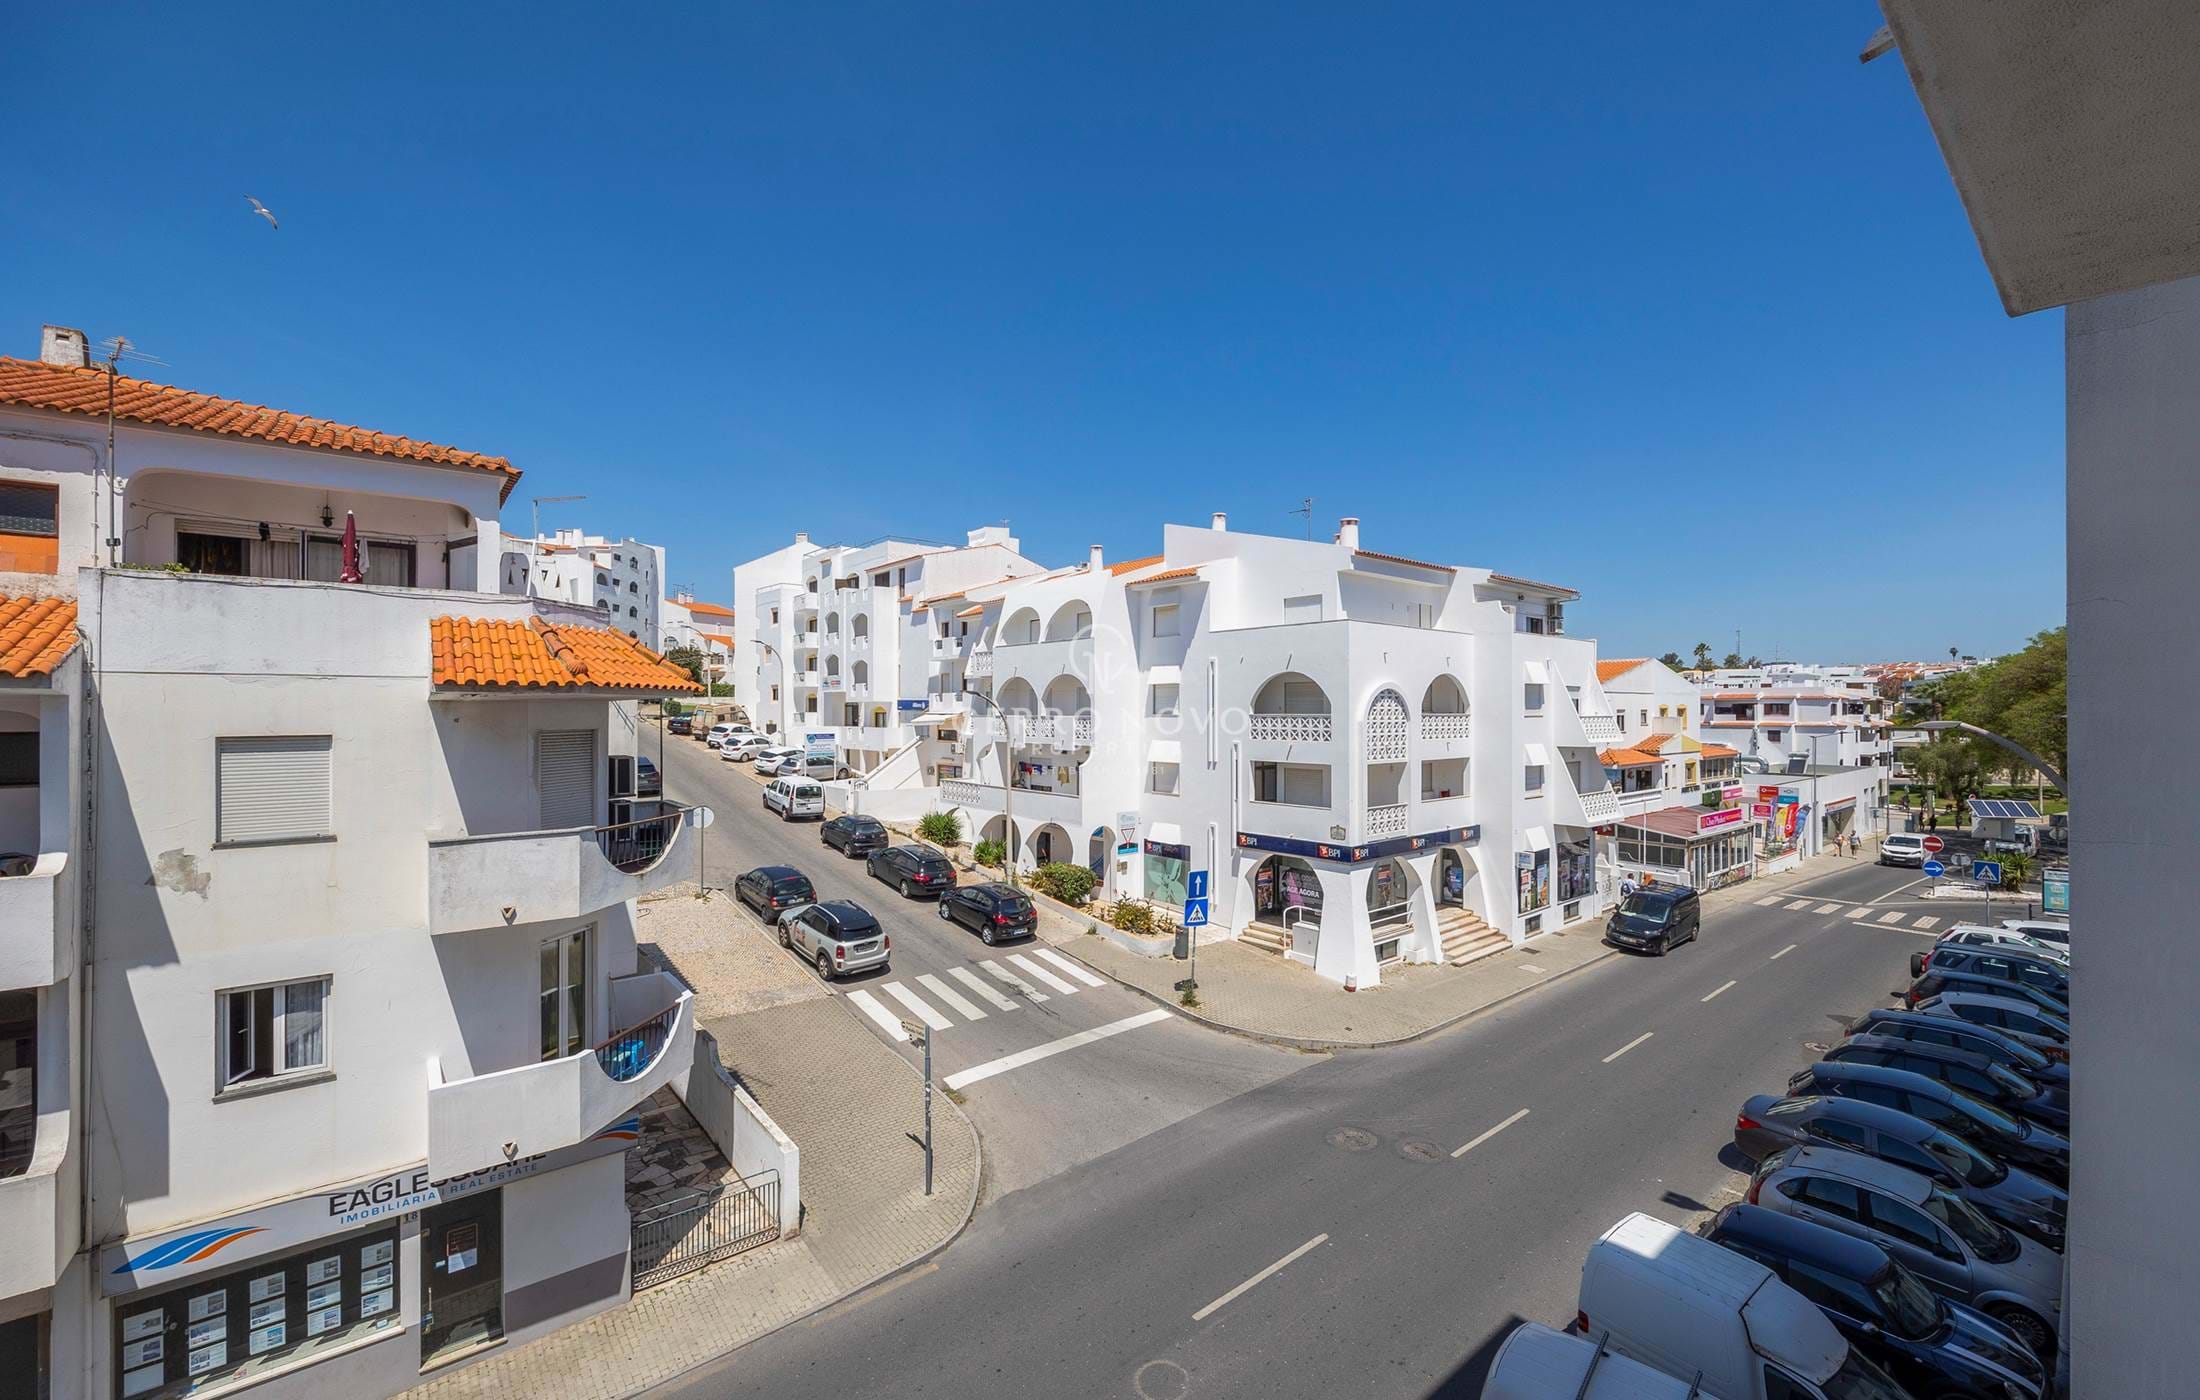 Large, completely renovated T3 central Albufeira apartment with sea views 